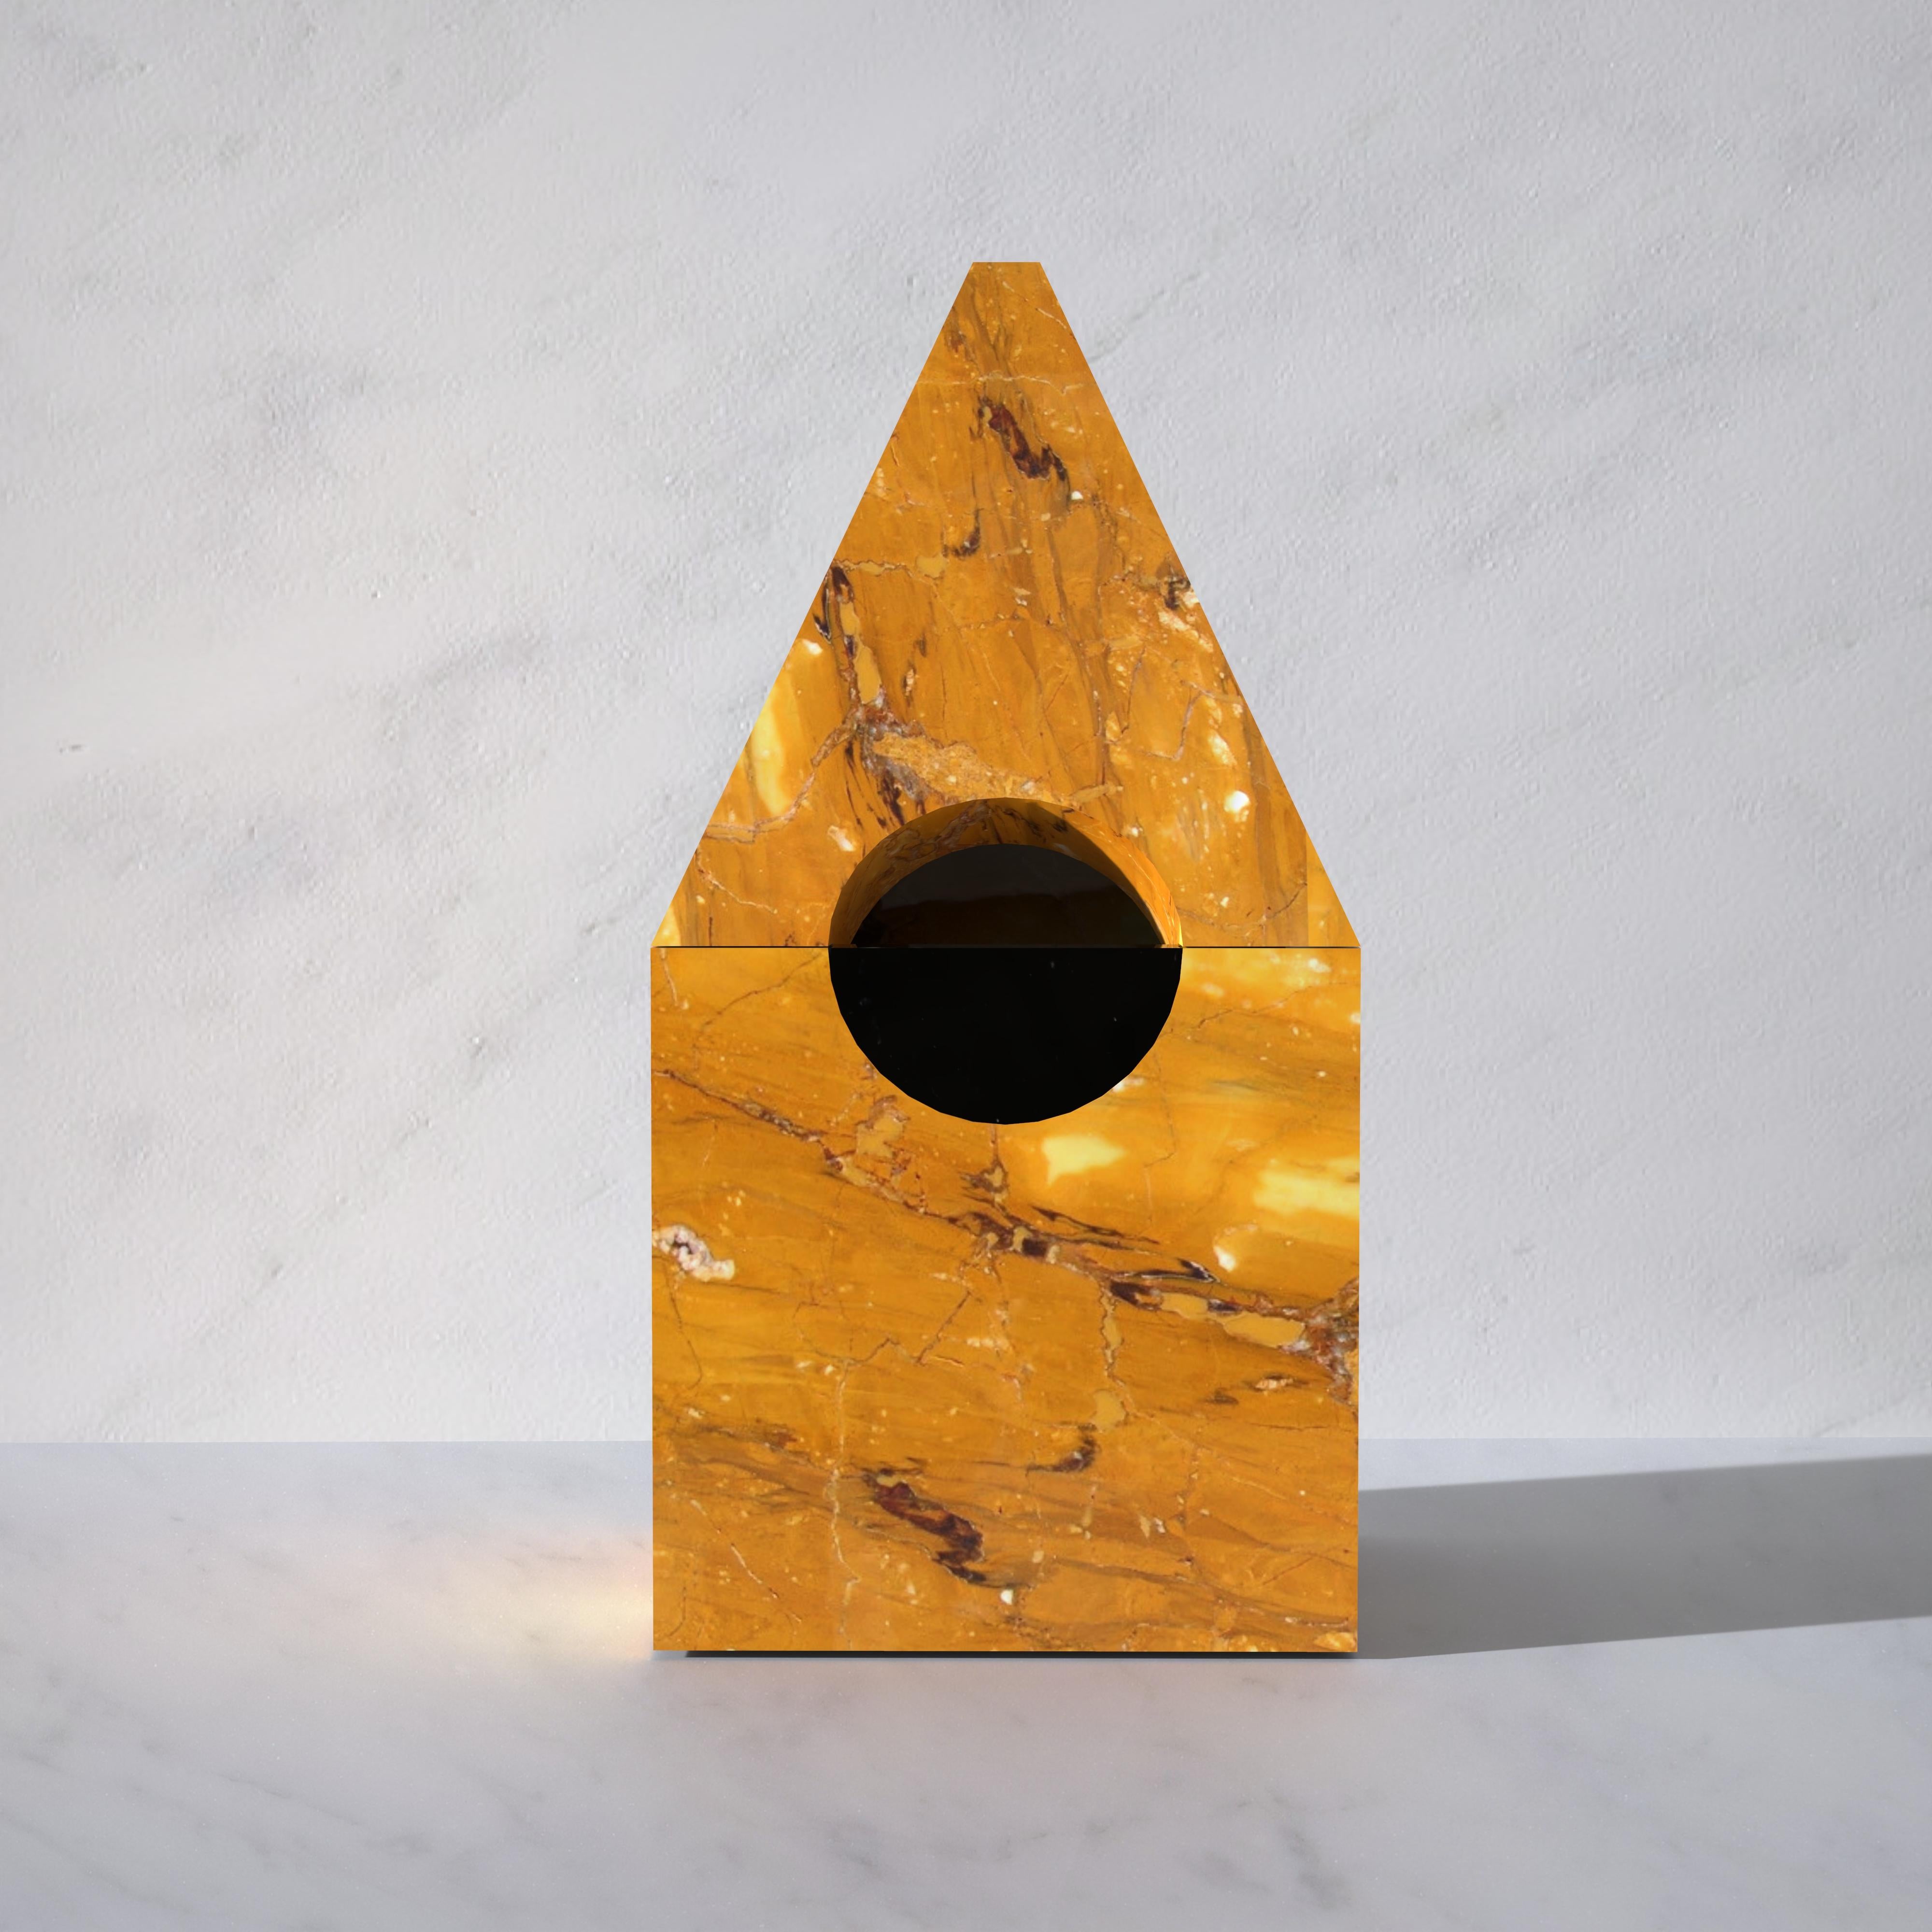 The sweetest memories deserve a precious casket. Adorned with a half-moon set into its walls, the Nostalgia portagingilli is made of two-tone marble. The bold combination of yellow and black marble lends a sophisticated and classic allure. A small